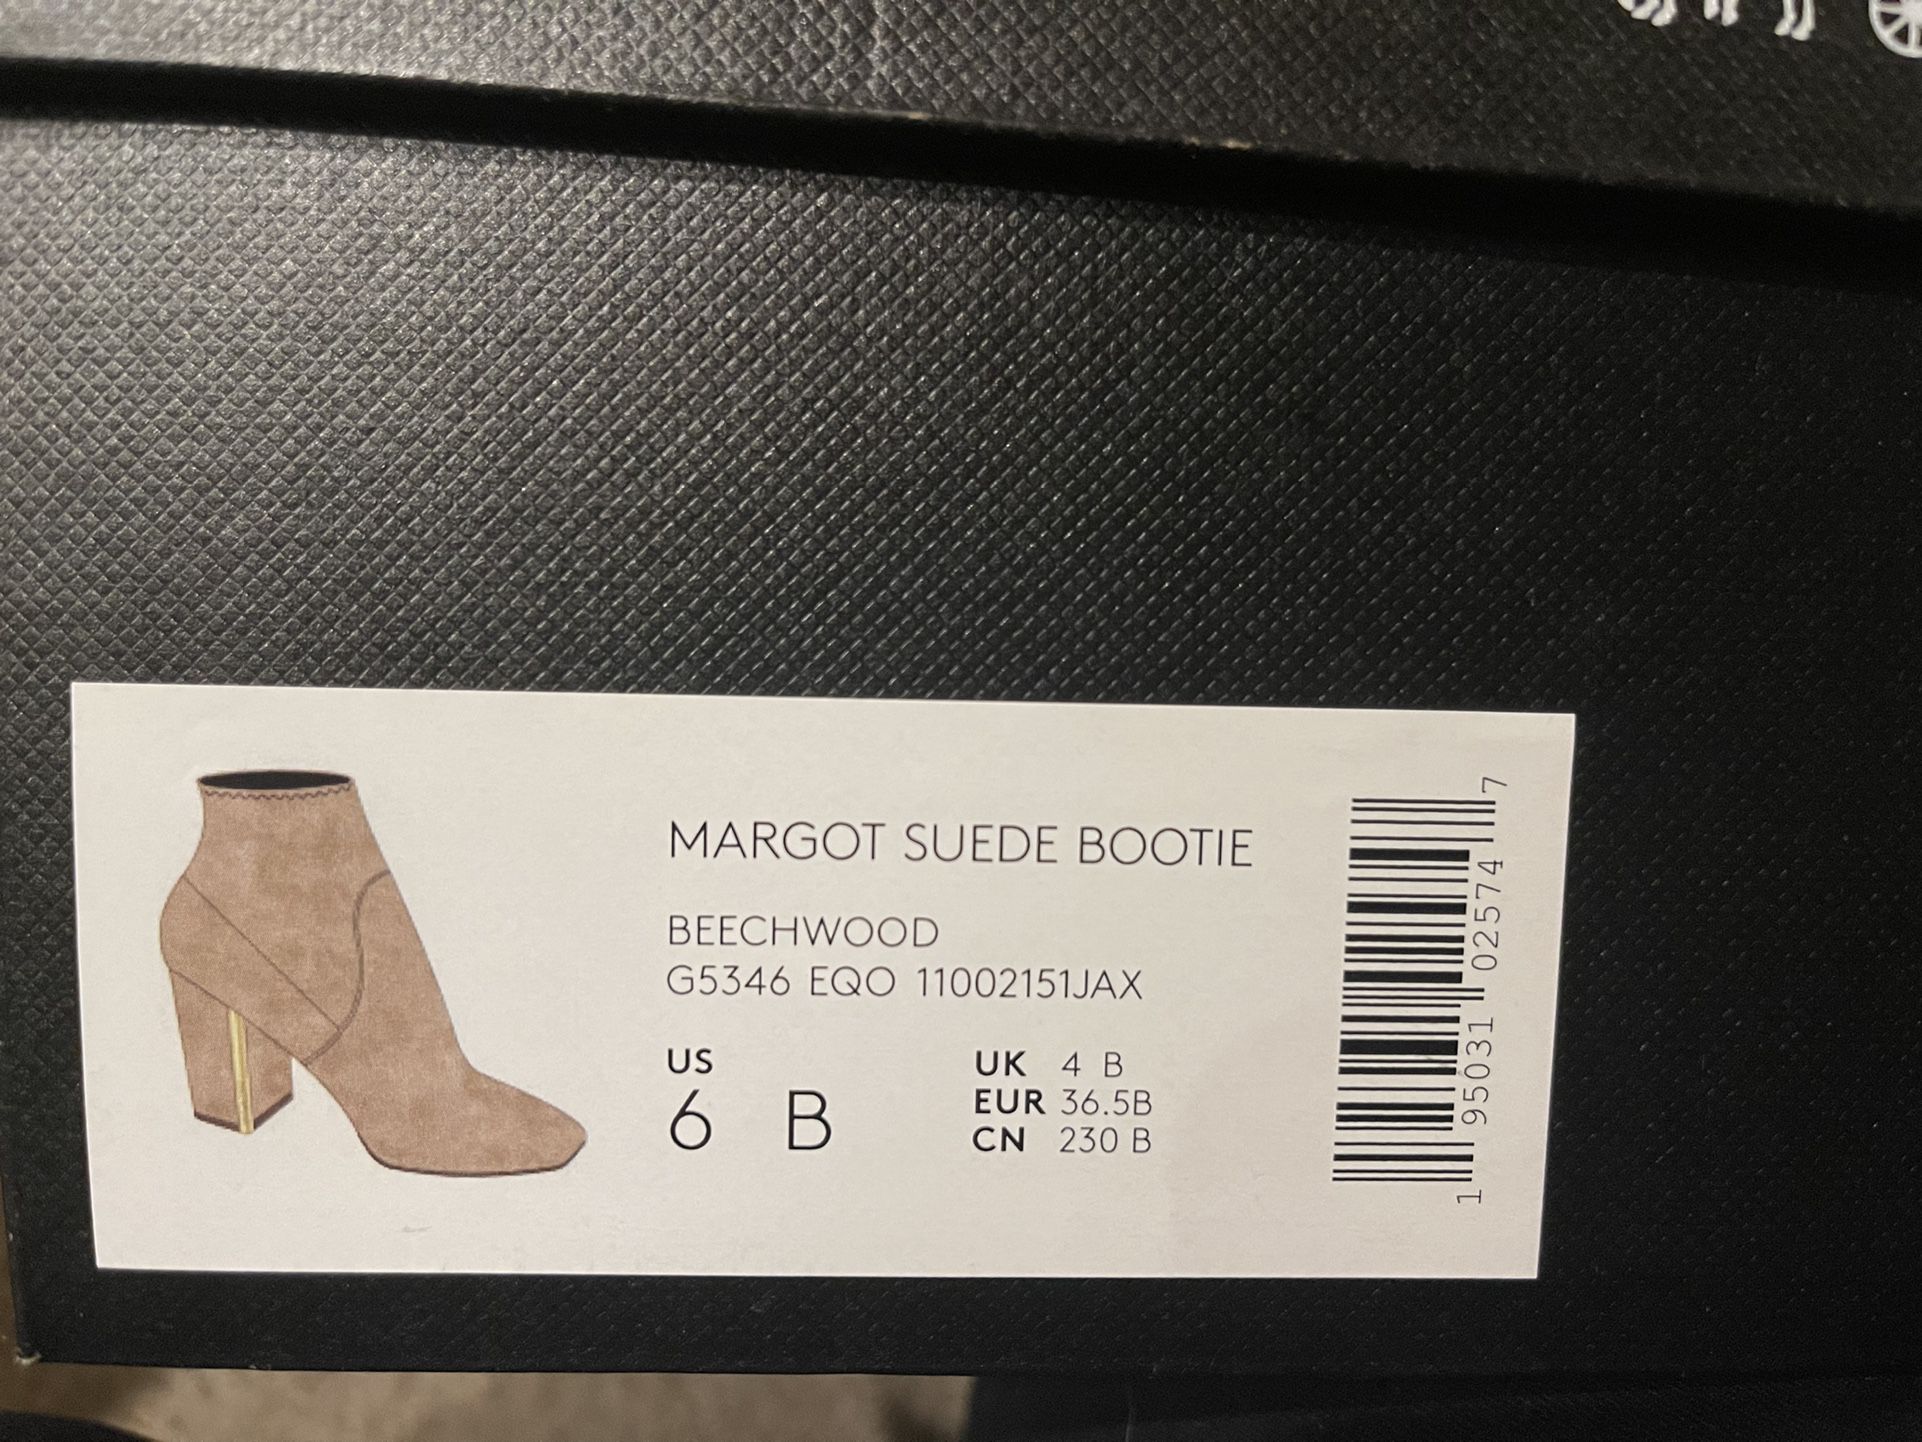 NWT COACH Boots - Margot Suede Booties